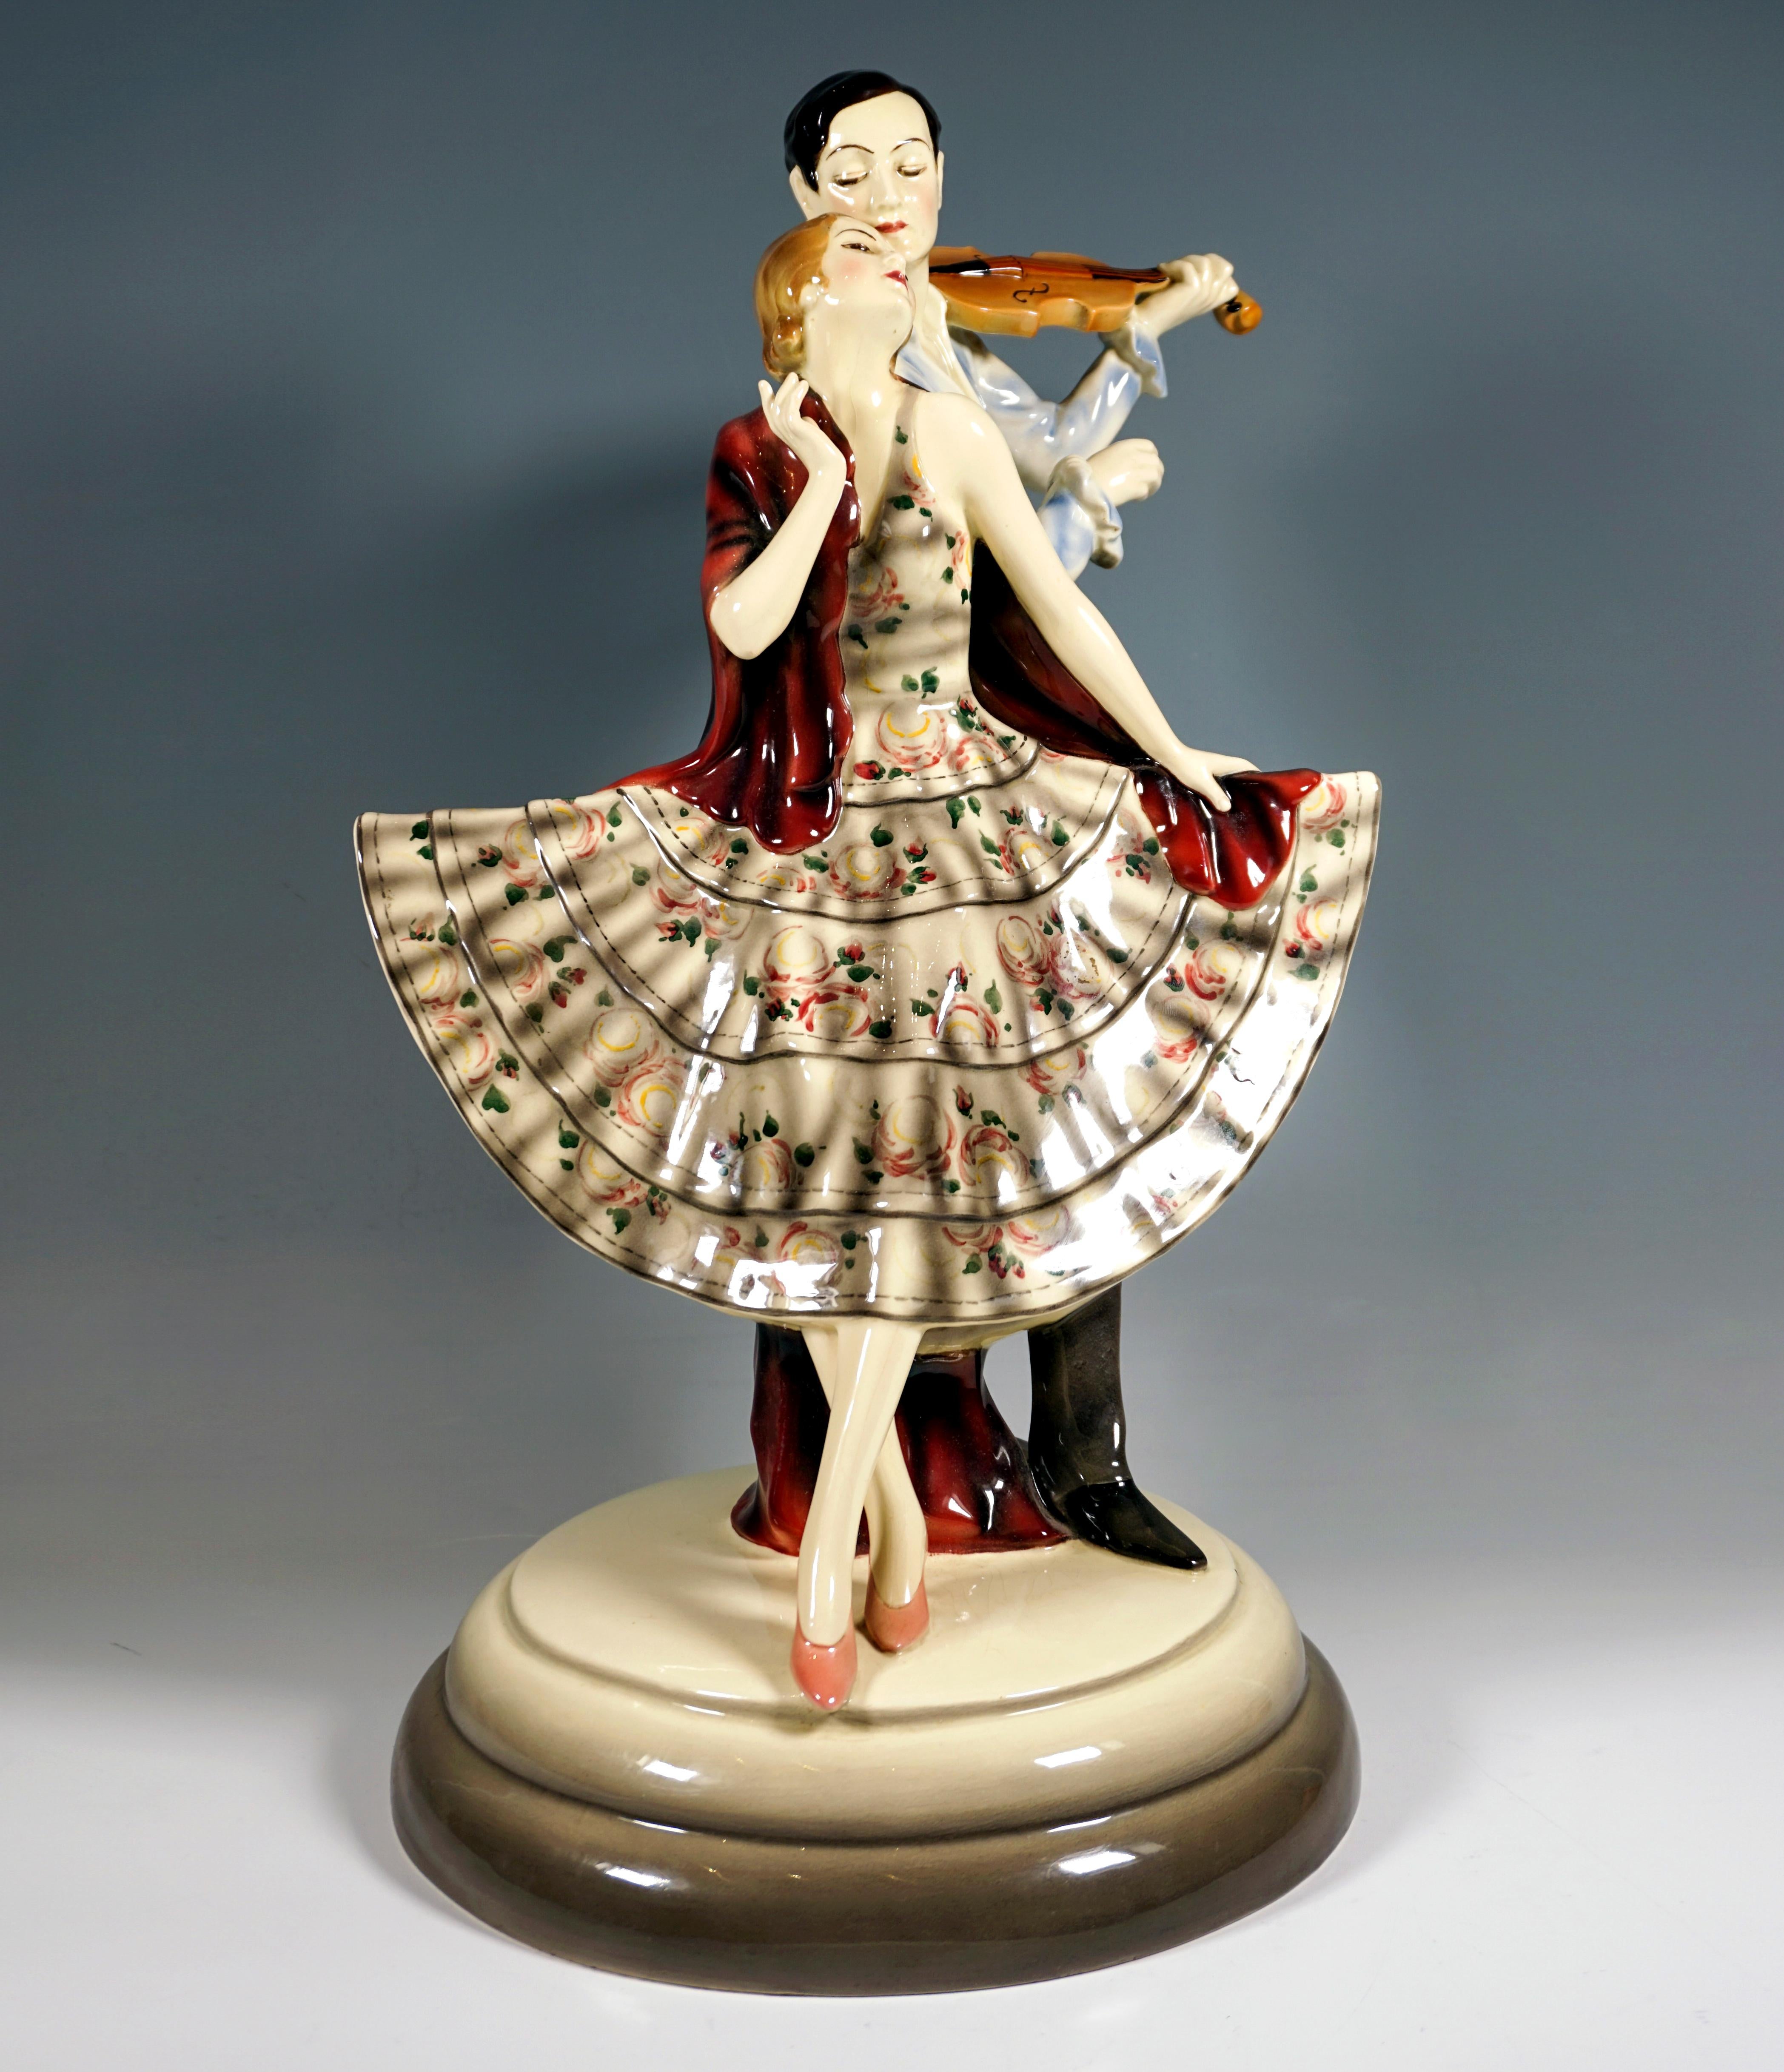 Rare Art Déco Goldscheider Figure Group Of The 1930s:
Gallant couple: dancer in a fan-like flared dress with flounces and floral decoration with her upper body and crossed legs leaning on the right side of the violinist standing behind her in a